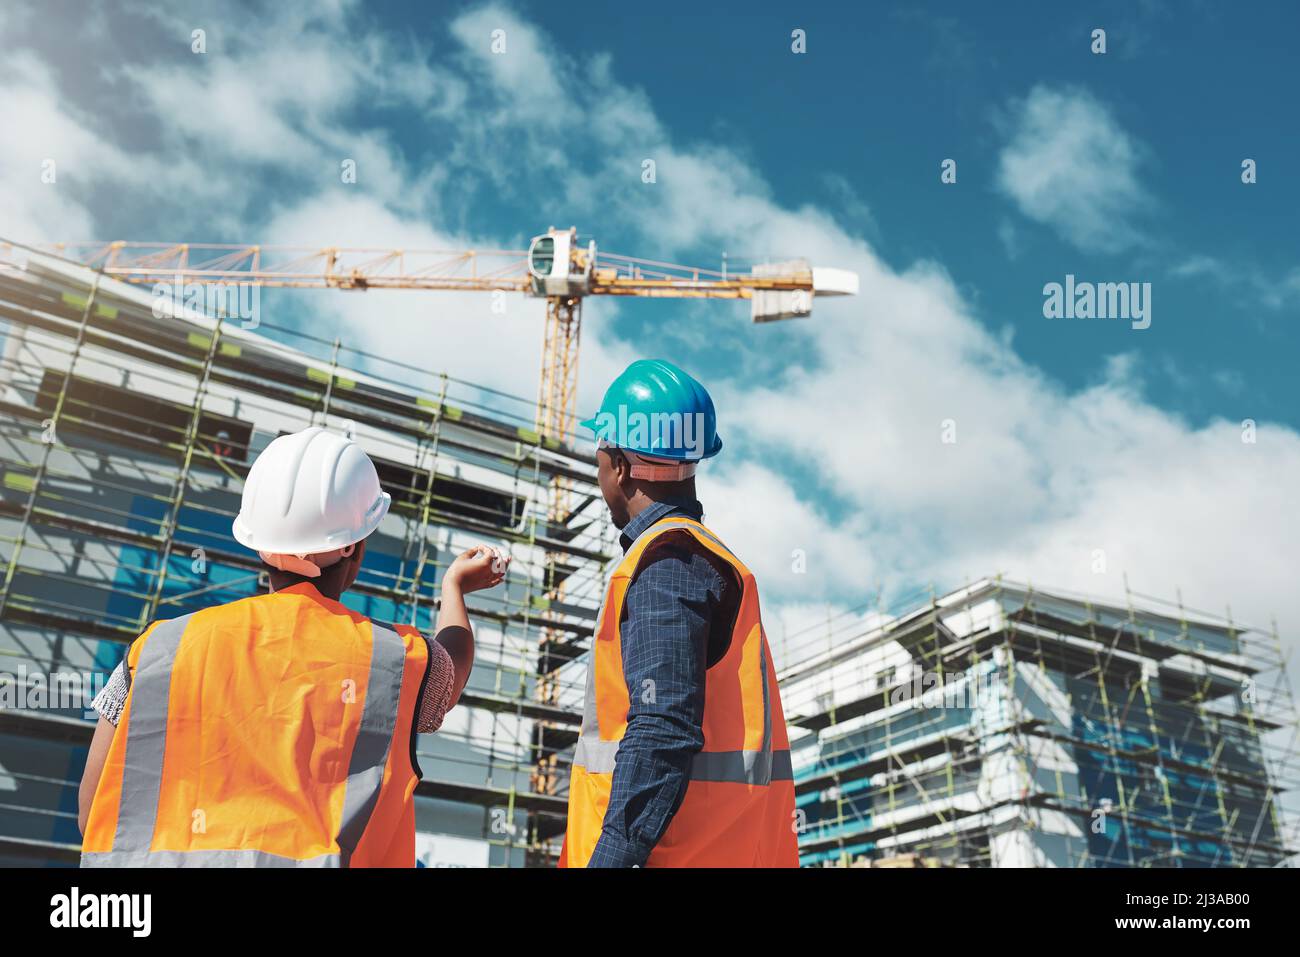 Their reputation is about to raise the roof. Shot of a young man and woman assessing progress of the building at a construction site. Stock Photo